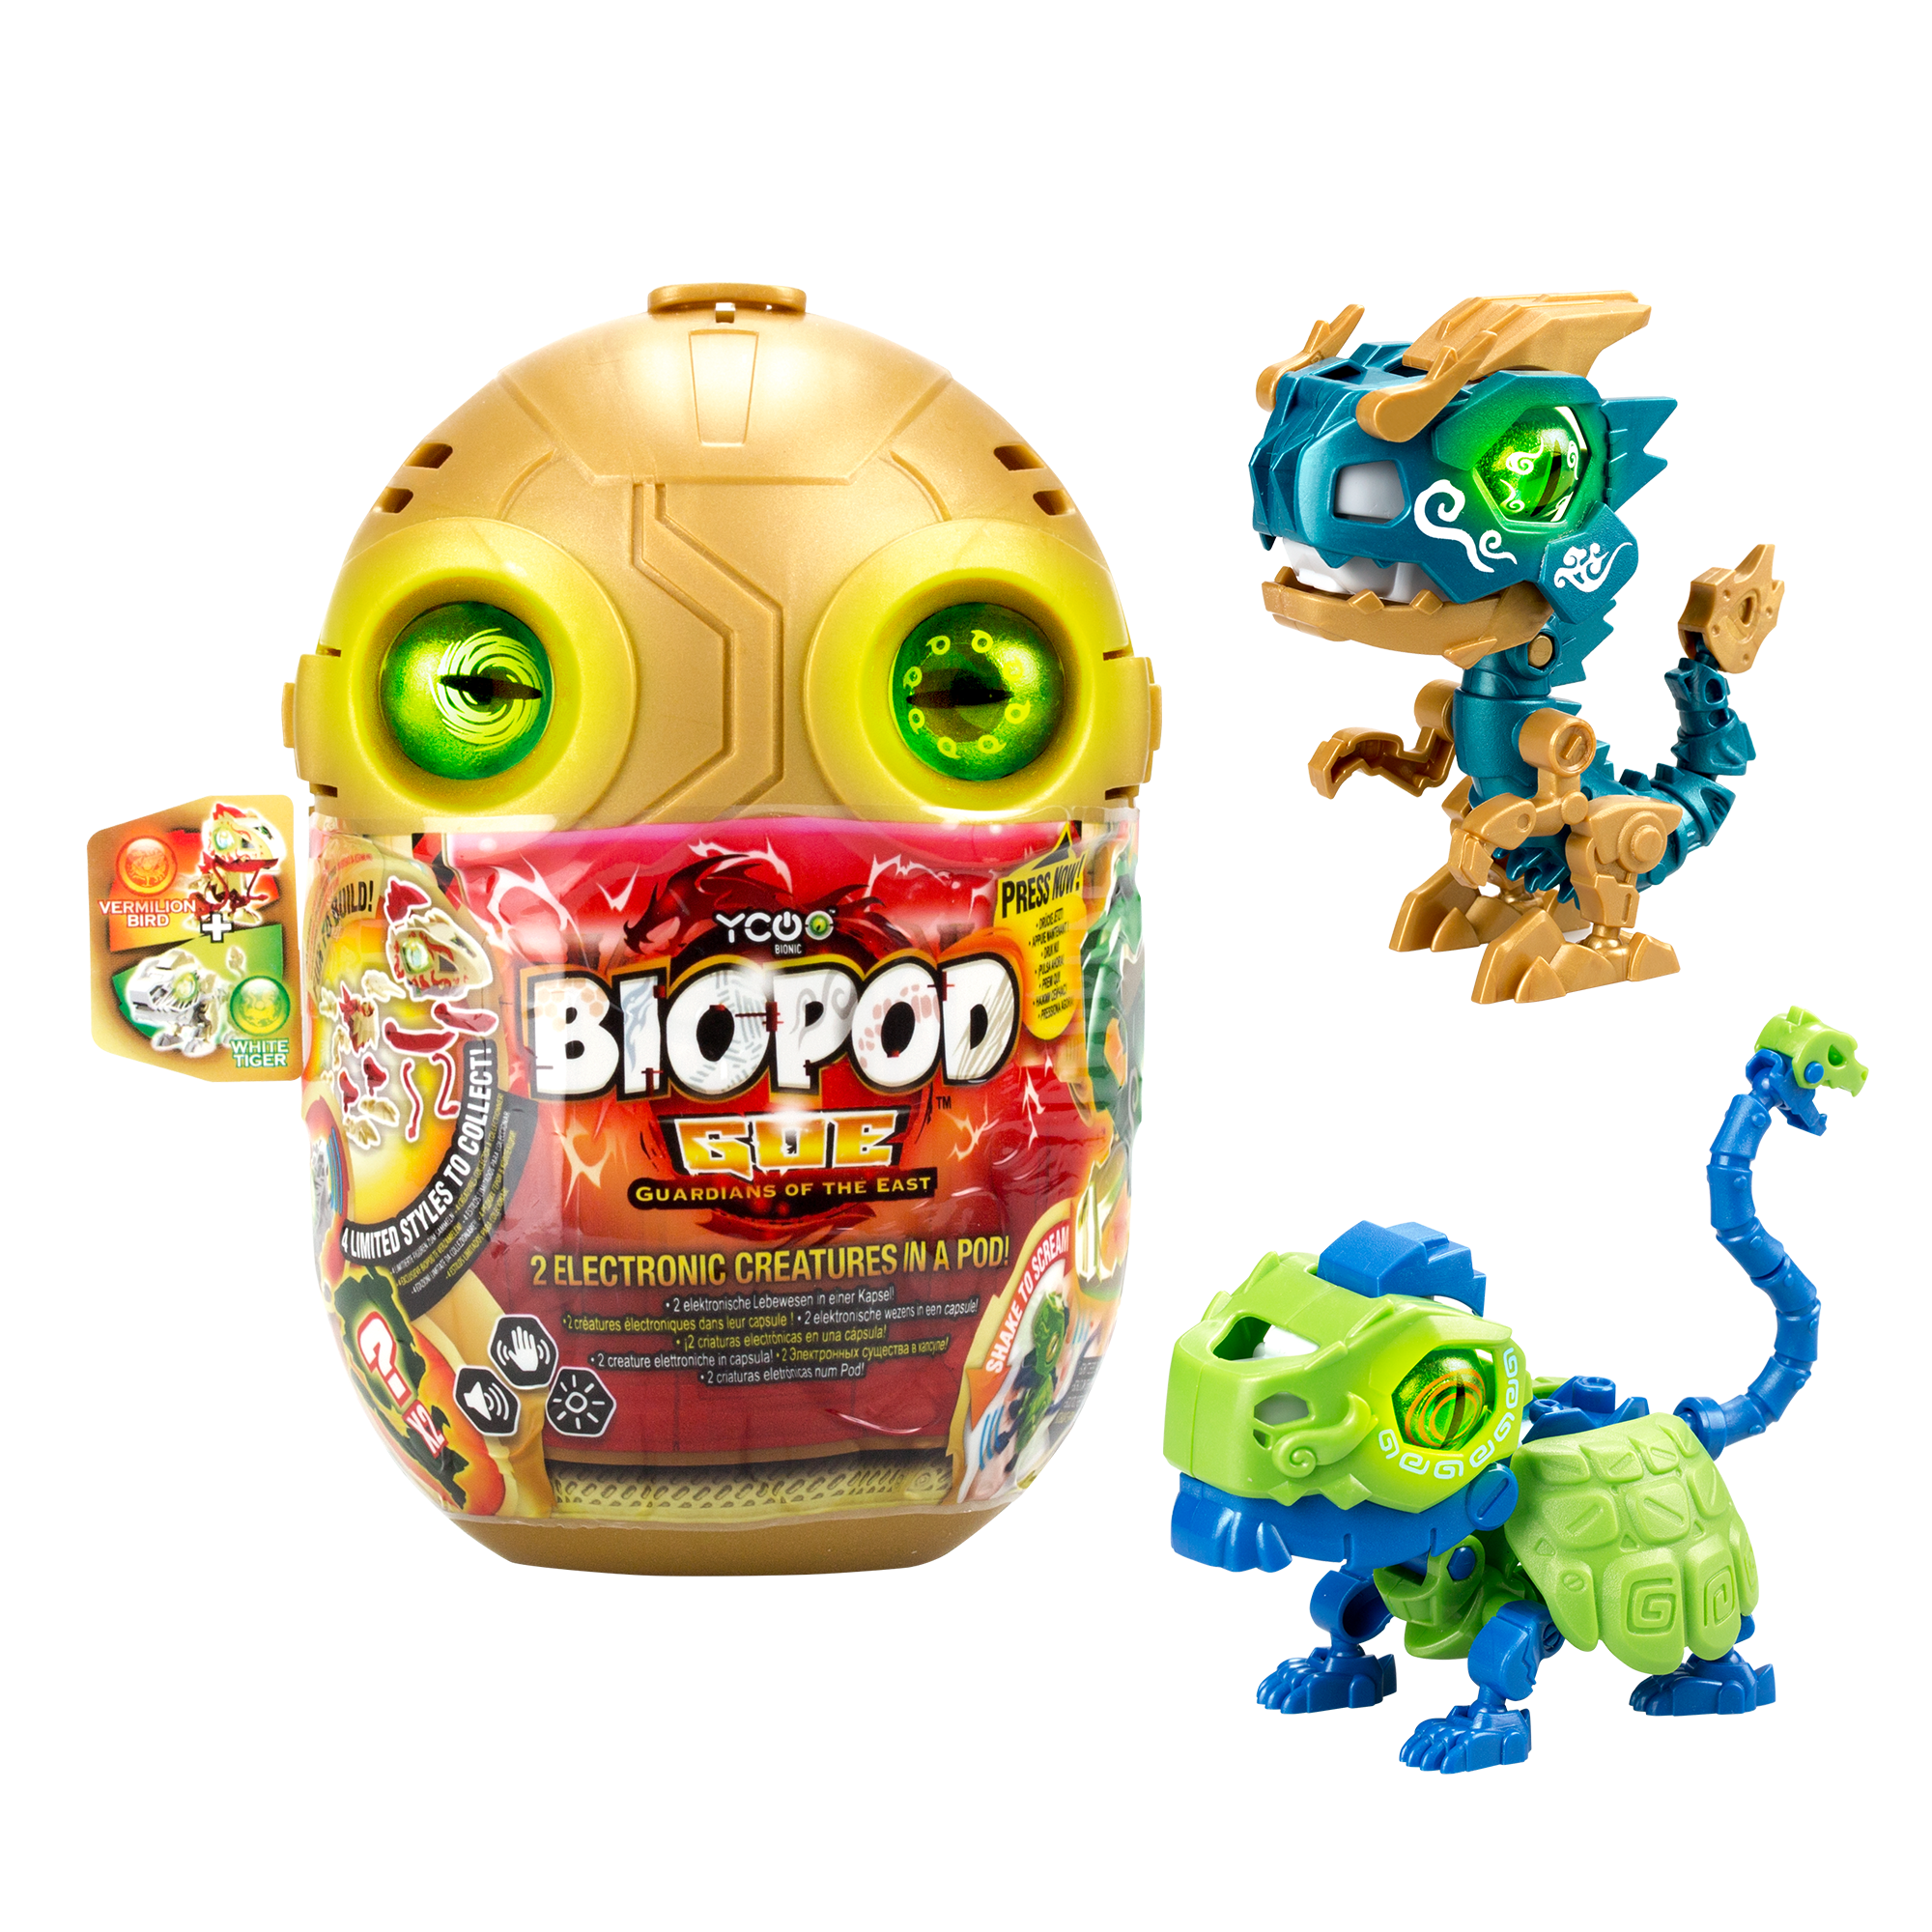 YCOO - Biopod Kombat Duo Pack - 2 Light and Sound Electronic Creatures to  Build and Collect - Pink and Green - Toy for Children Ages 5 and Up :  : Toys & Games